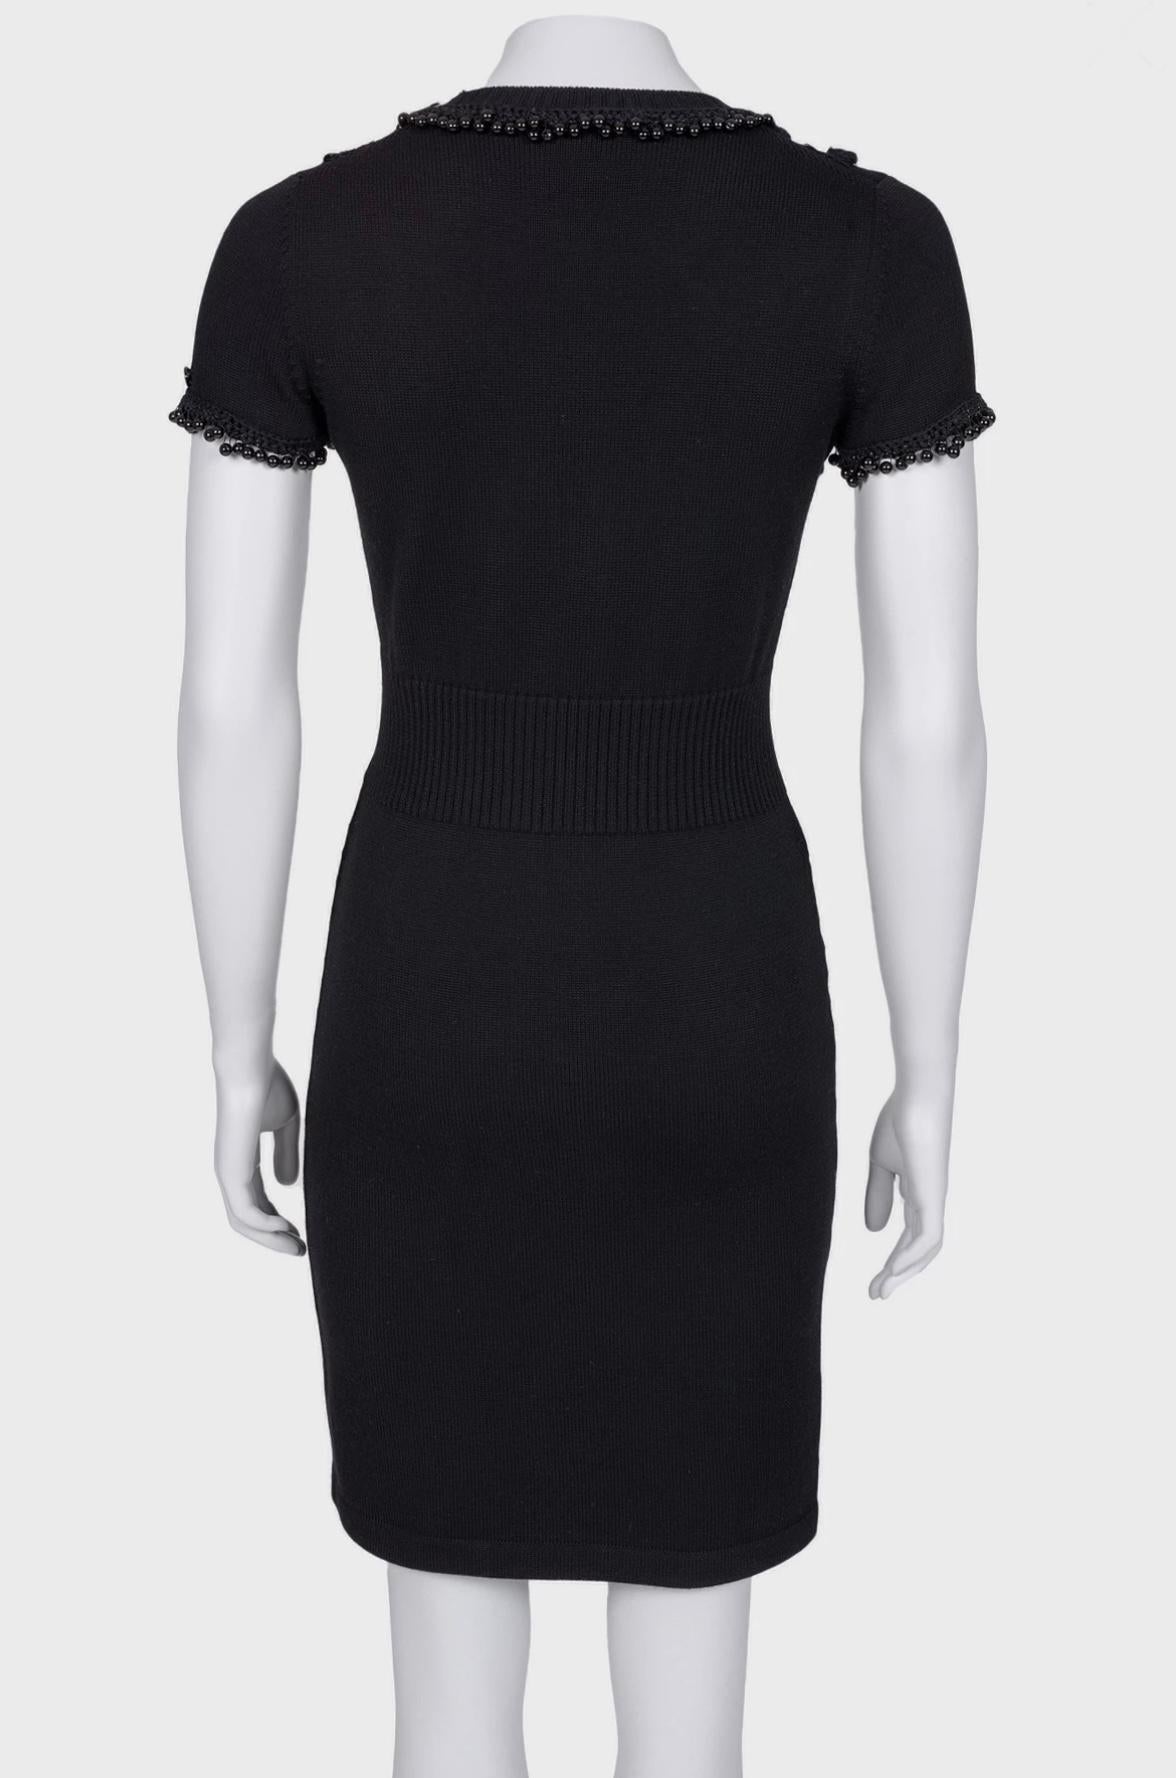 Chanel Pearl Embellished Black Dress with Couture Appliques For Sale 2